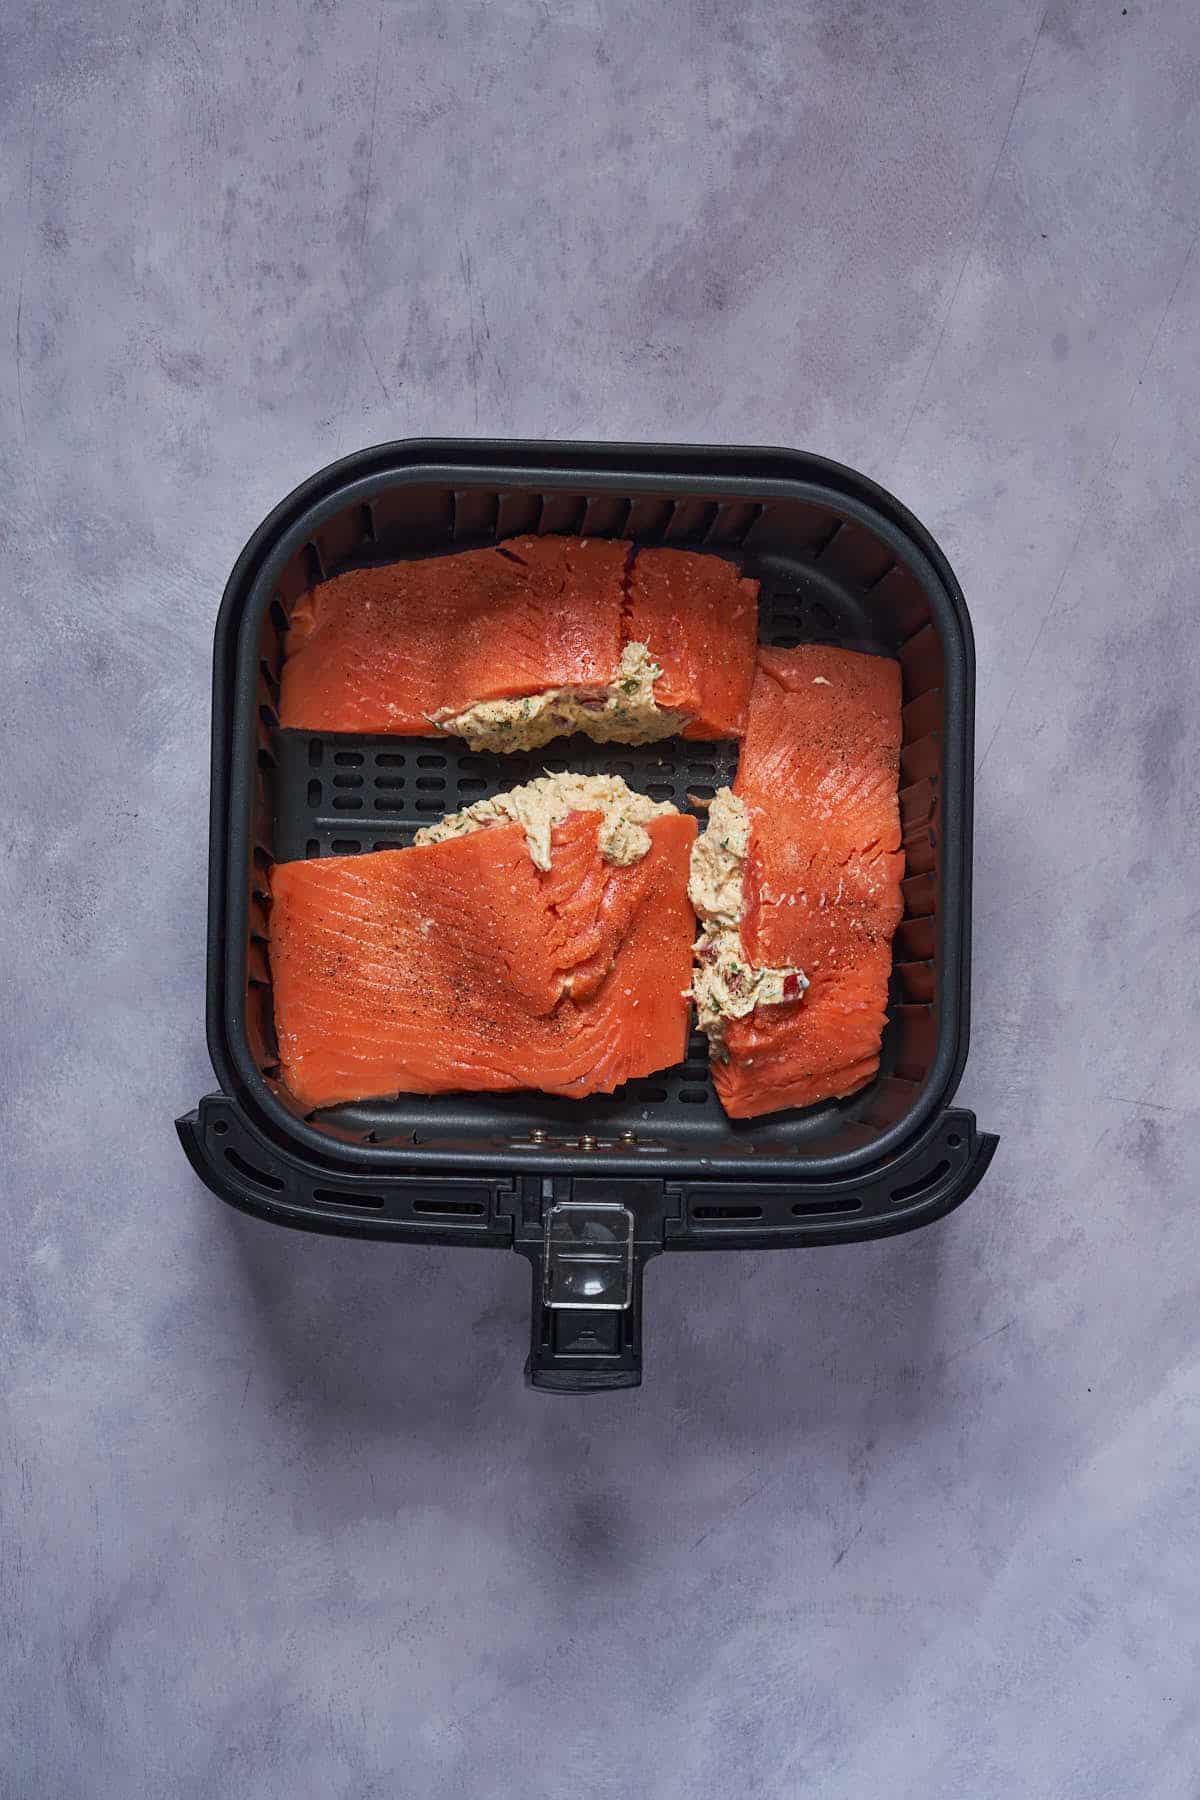 Salmon fillets stuffed with the crab meat mixture in the air fryer basket before cooking.